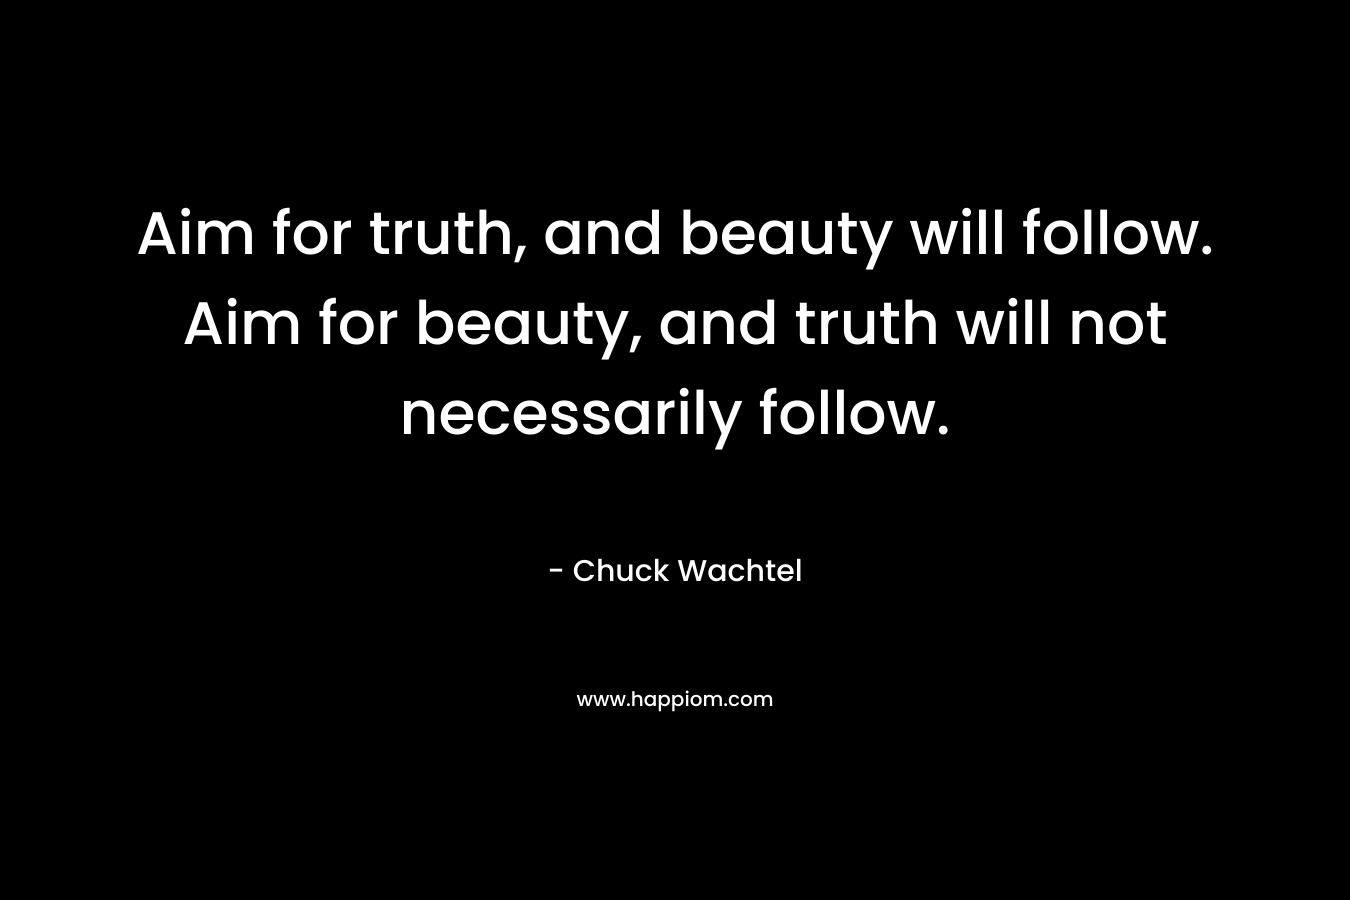 Aim for truth, and beauty will follow. Aim for beauty, and truth will not necessarily follow.